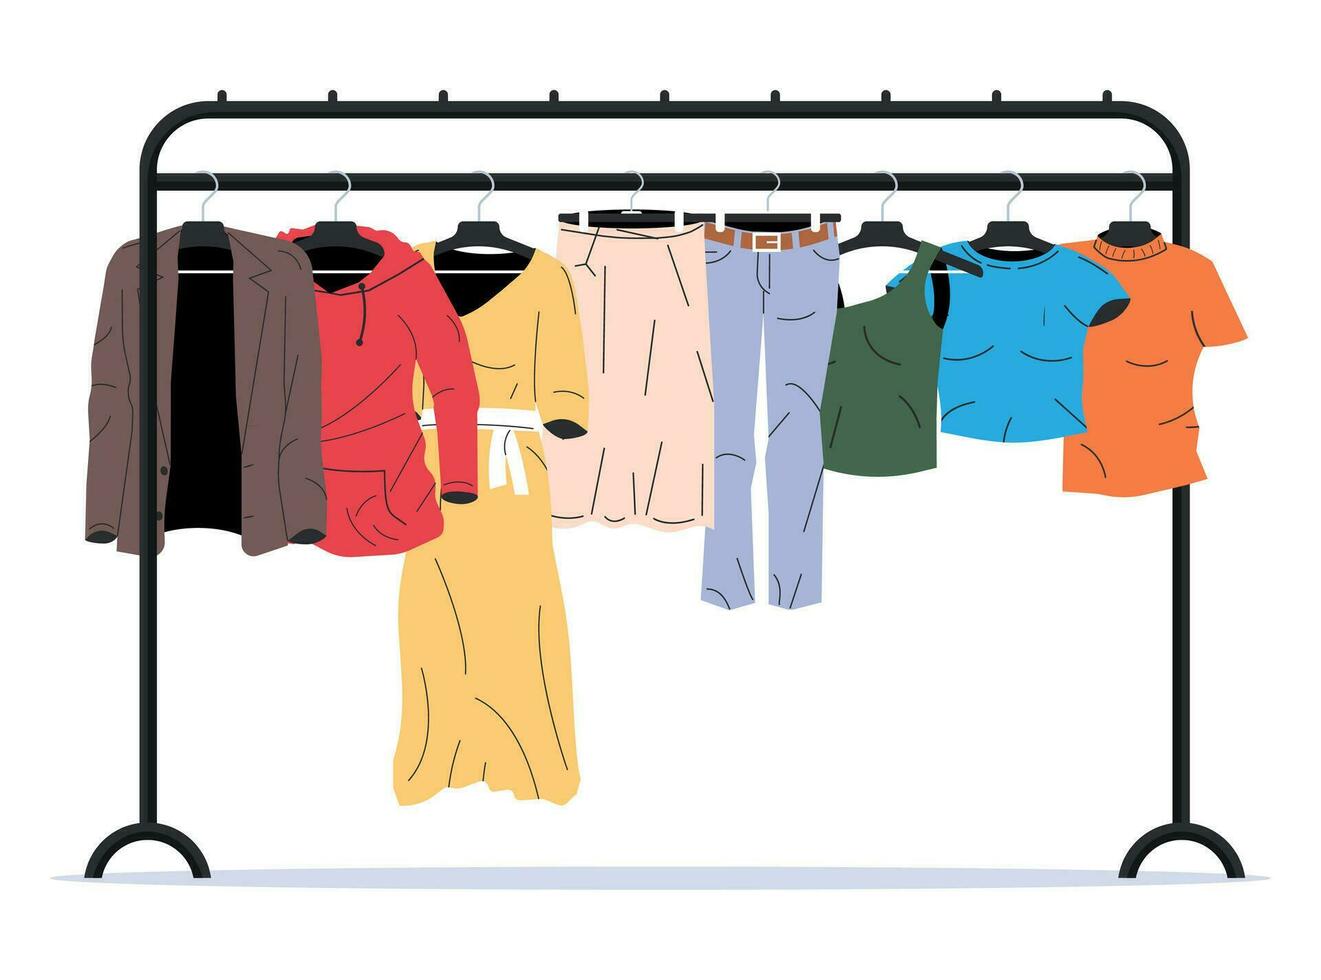 Mens and Womans Clothes on Hanger. Home or Shop Wardrobe. Clothes and Accessories. Various Hanging Clothing. Jacket, Shirt, Jeans, Pants. Cartoon Flat Vector Illustration